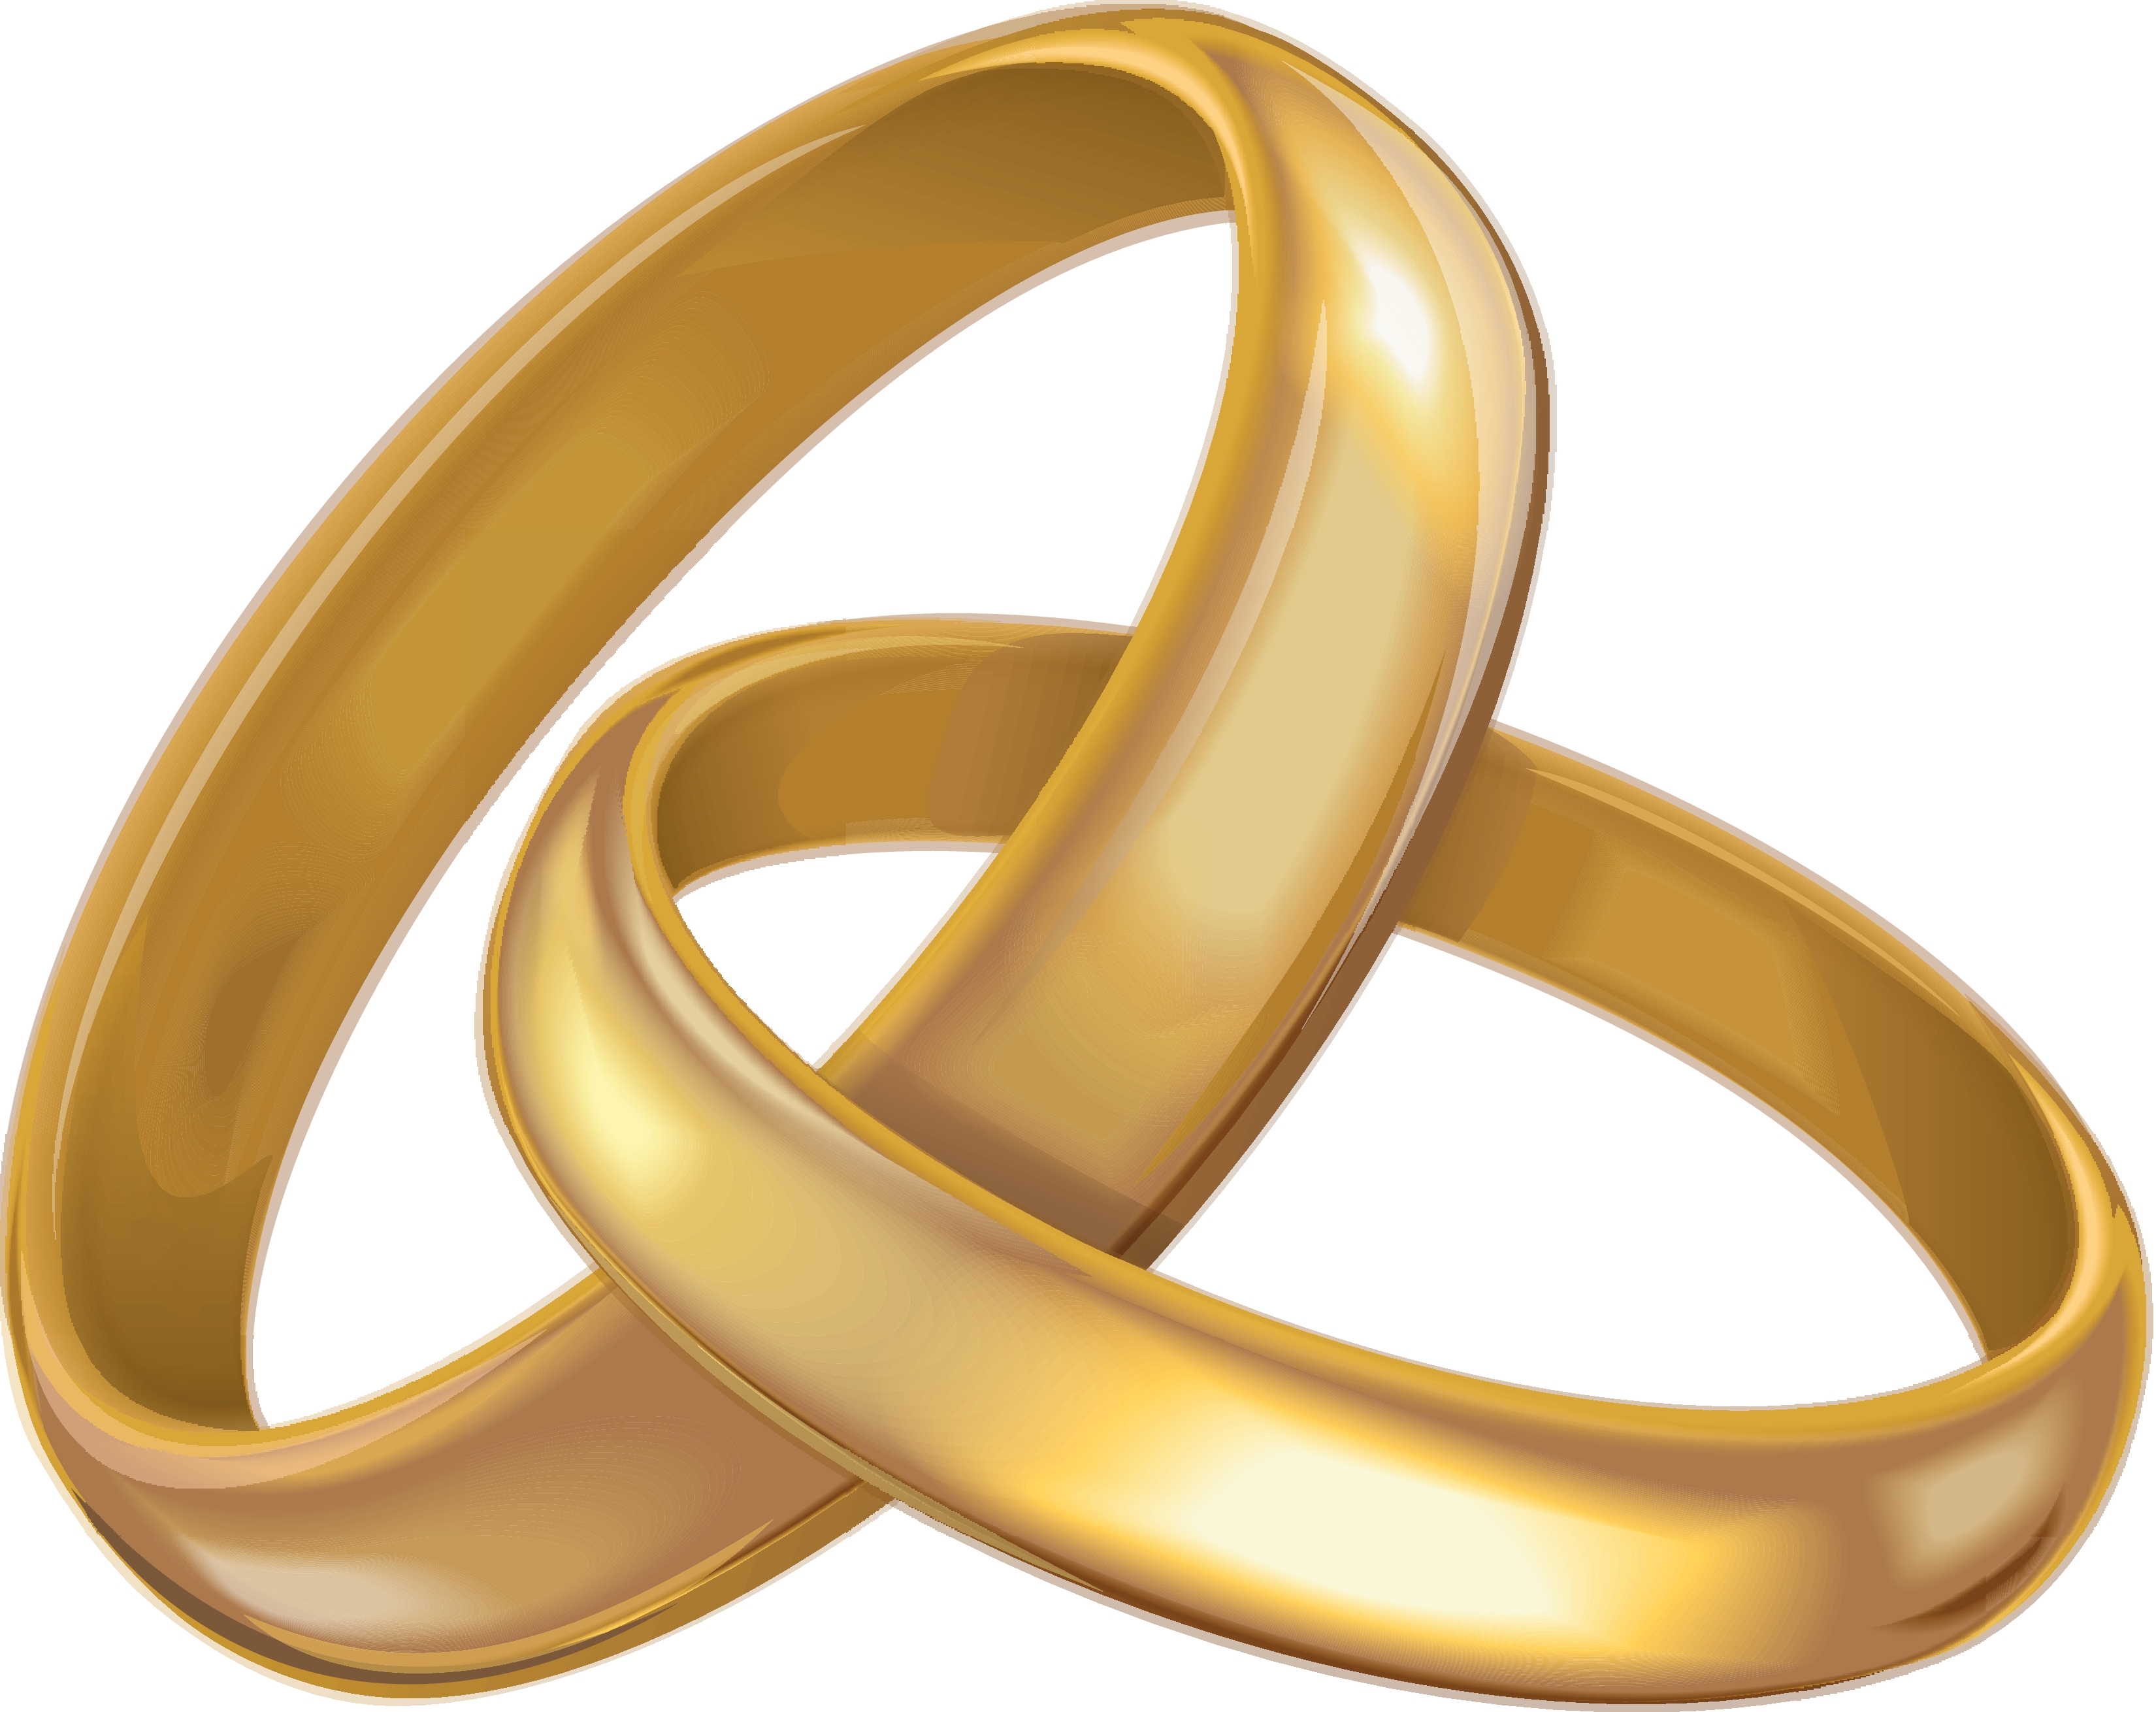 Wedding ring clip art pictures free clipart images 2 clipartcow 3